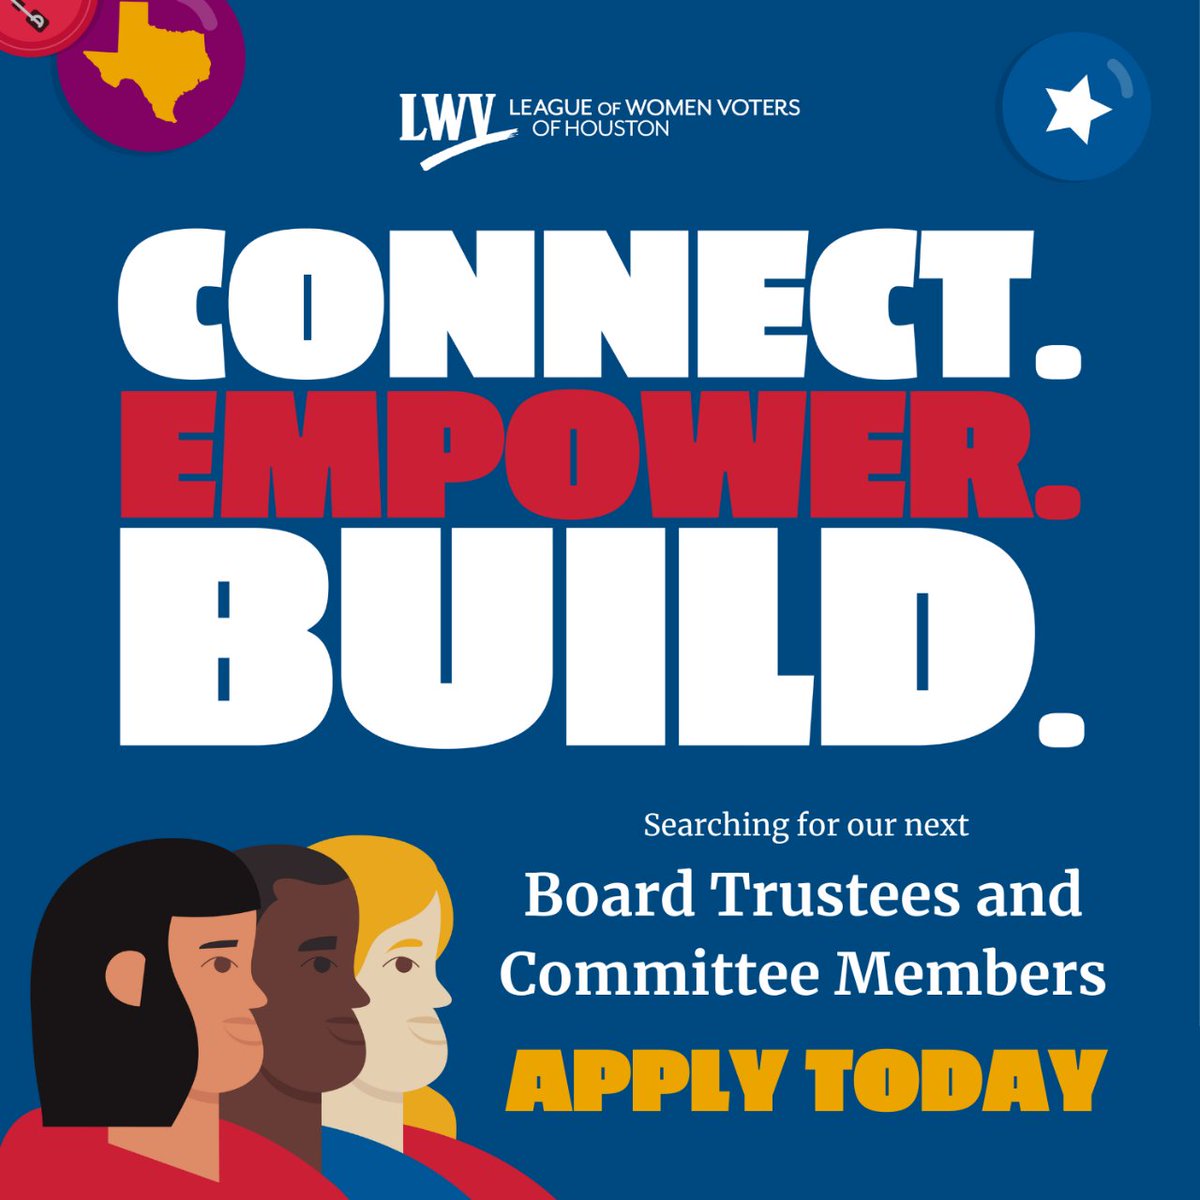 🔎 105/f/houston searching for like-minded civic engagement champions to serve Houston and strengthen democracy. Visit the lwvhouston . org website to get to know each other and apply today!  #lwvhouston #houstonvoter #houstonnonprofit #houstonwomeninbusiness